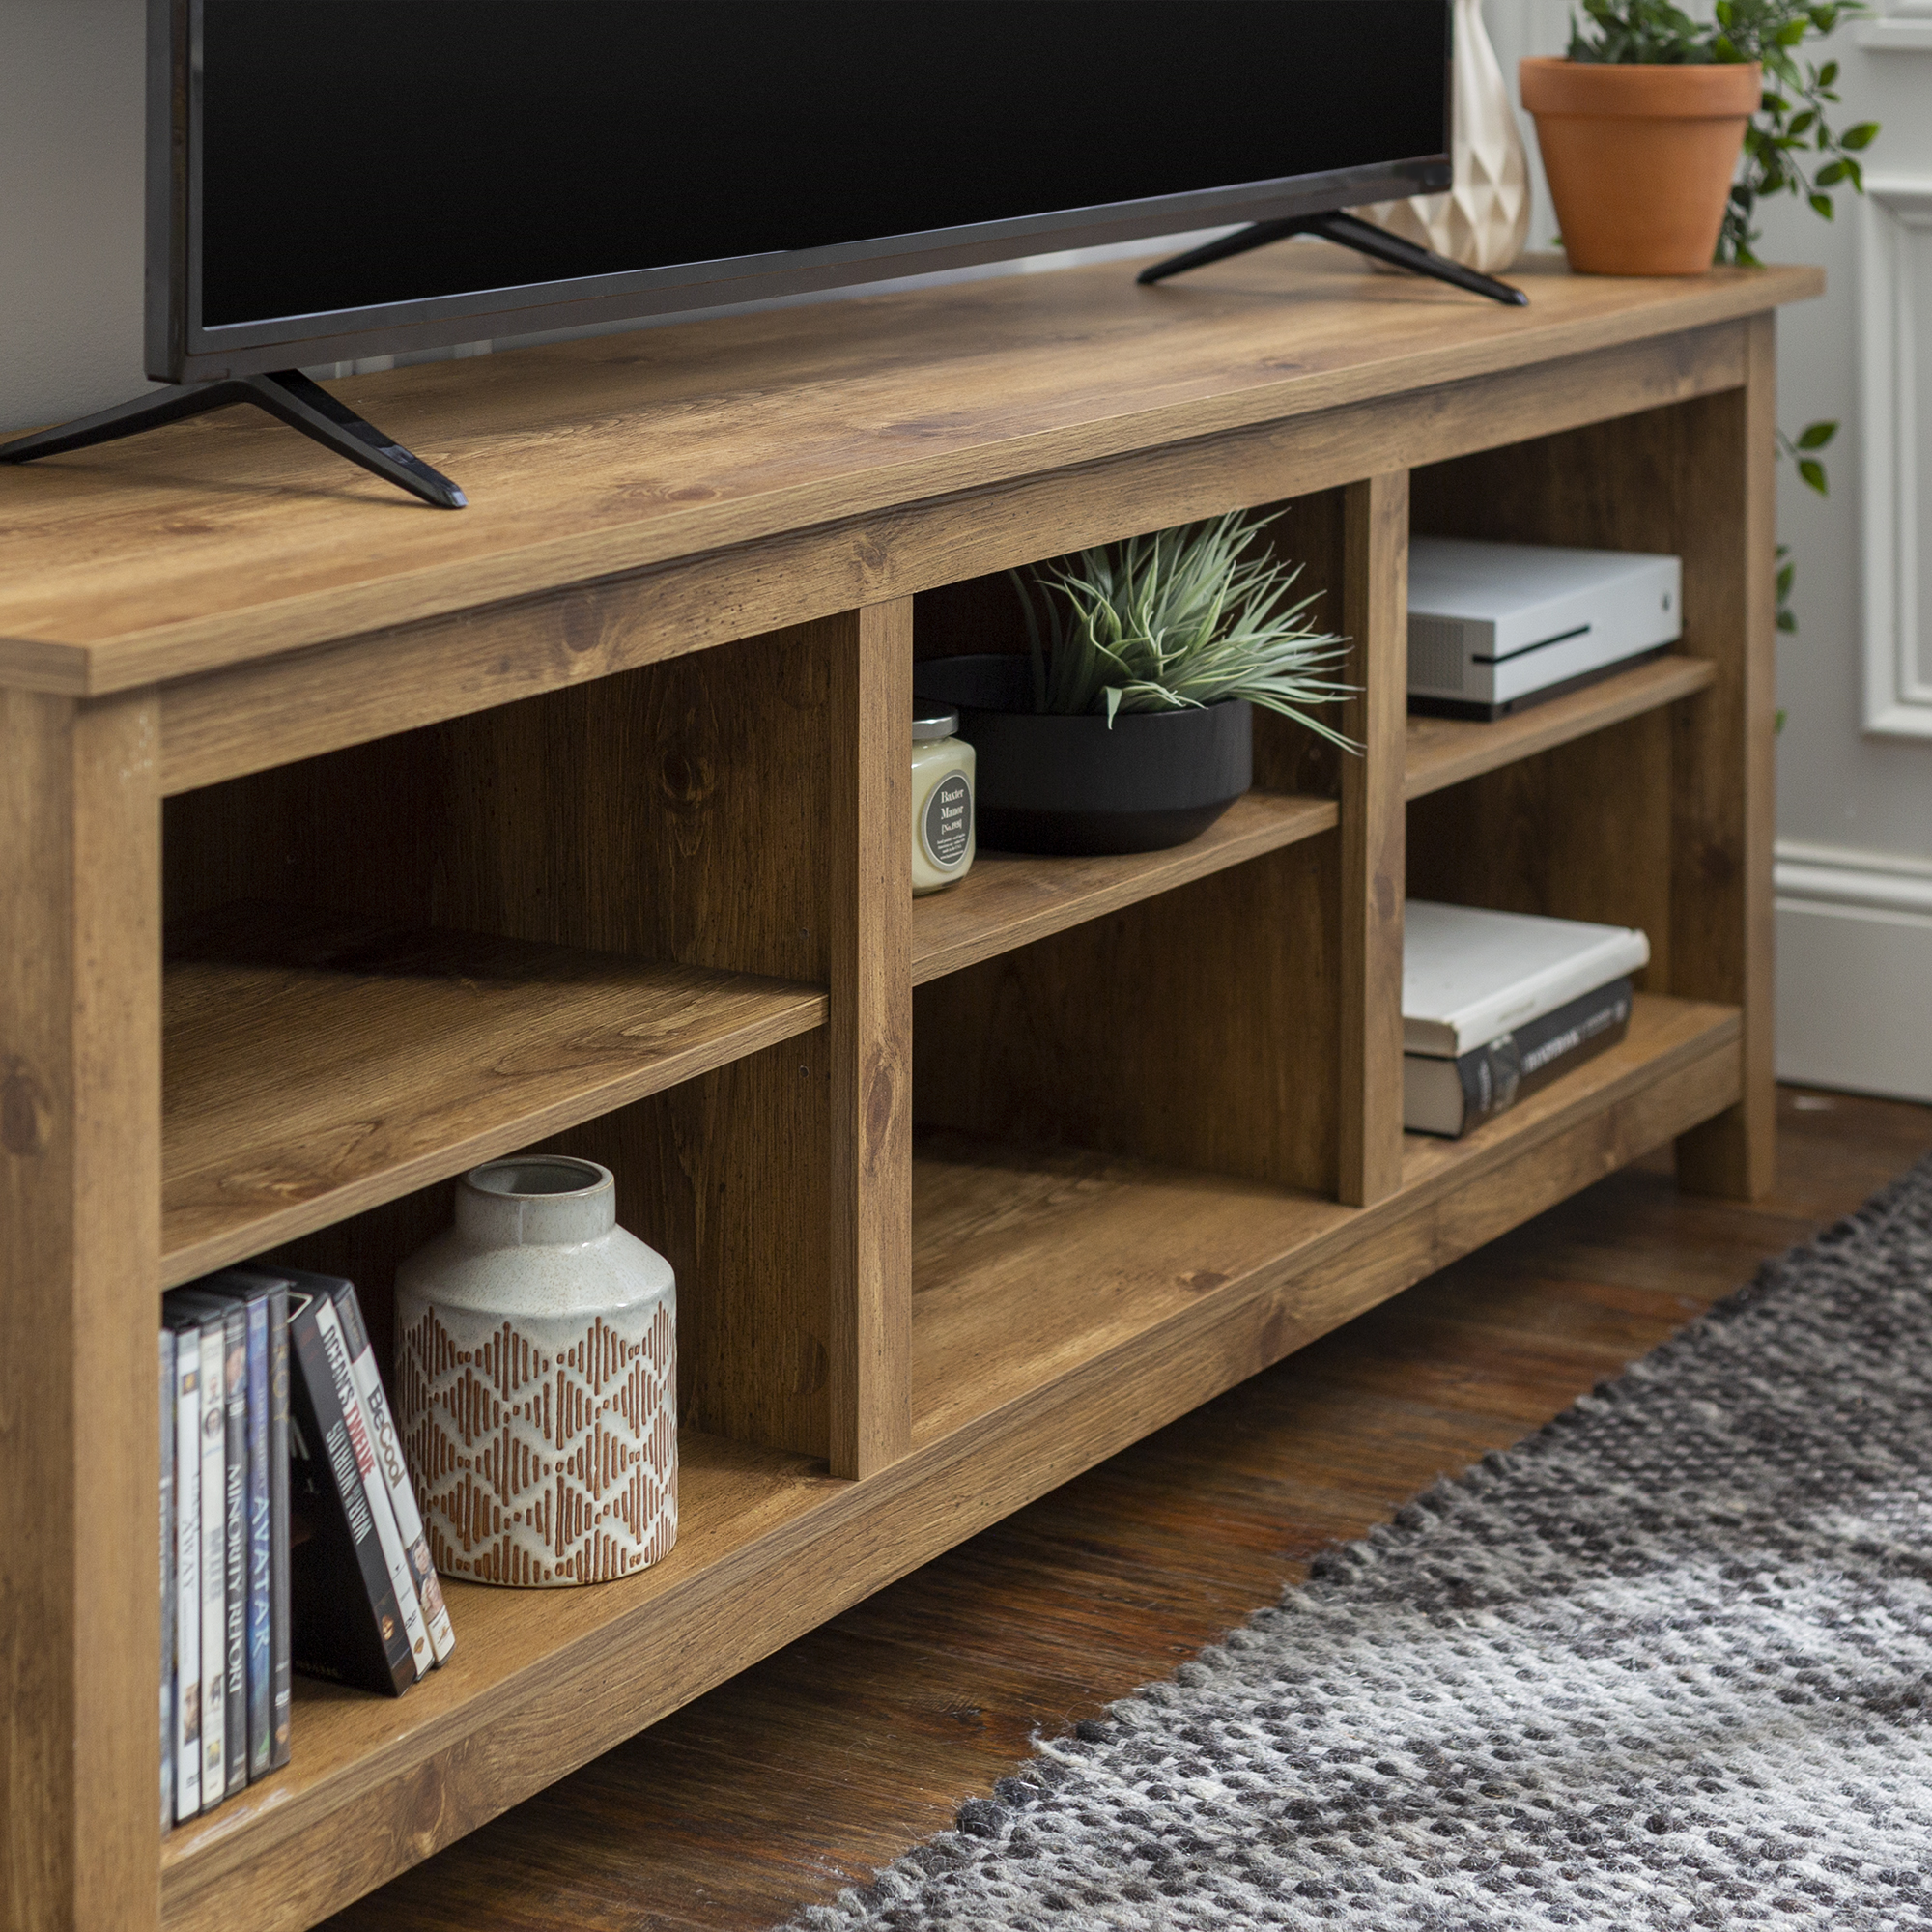 Woven Paths Open Storage TV Stand for TVs up to 80", Barnwood - image 5 of 12